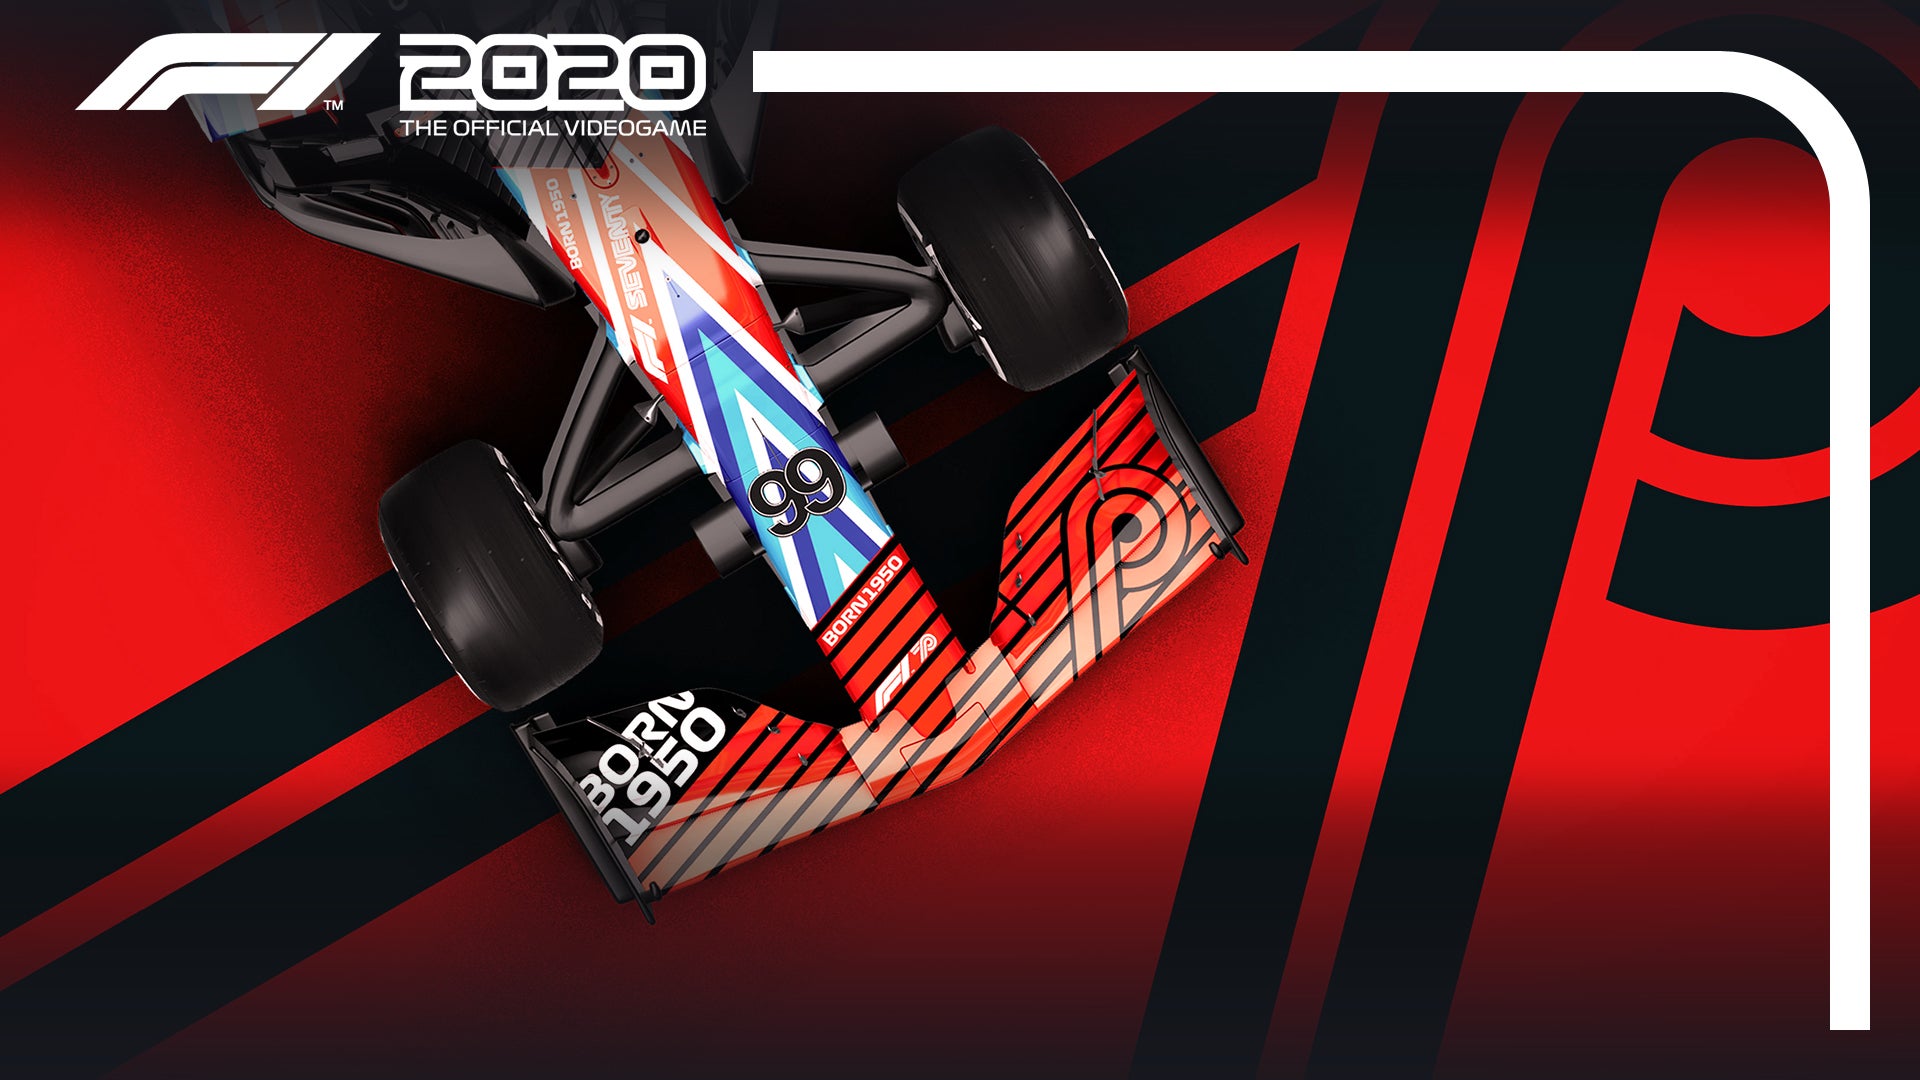 Let's Race Together: F1 2020 is Out Now for Xbox One - Xbox Wire